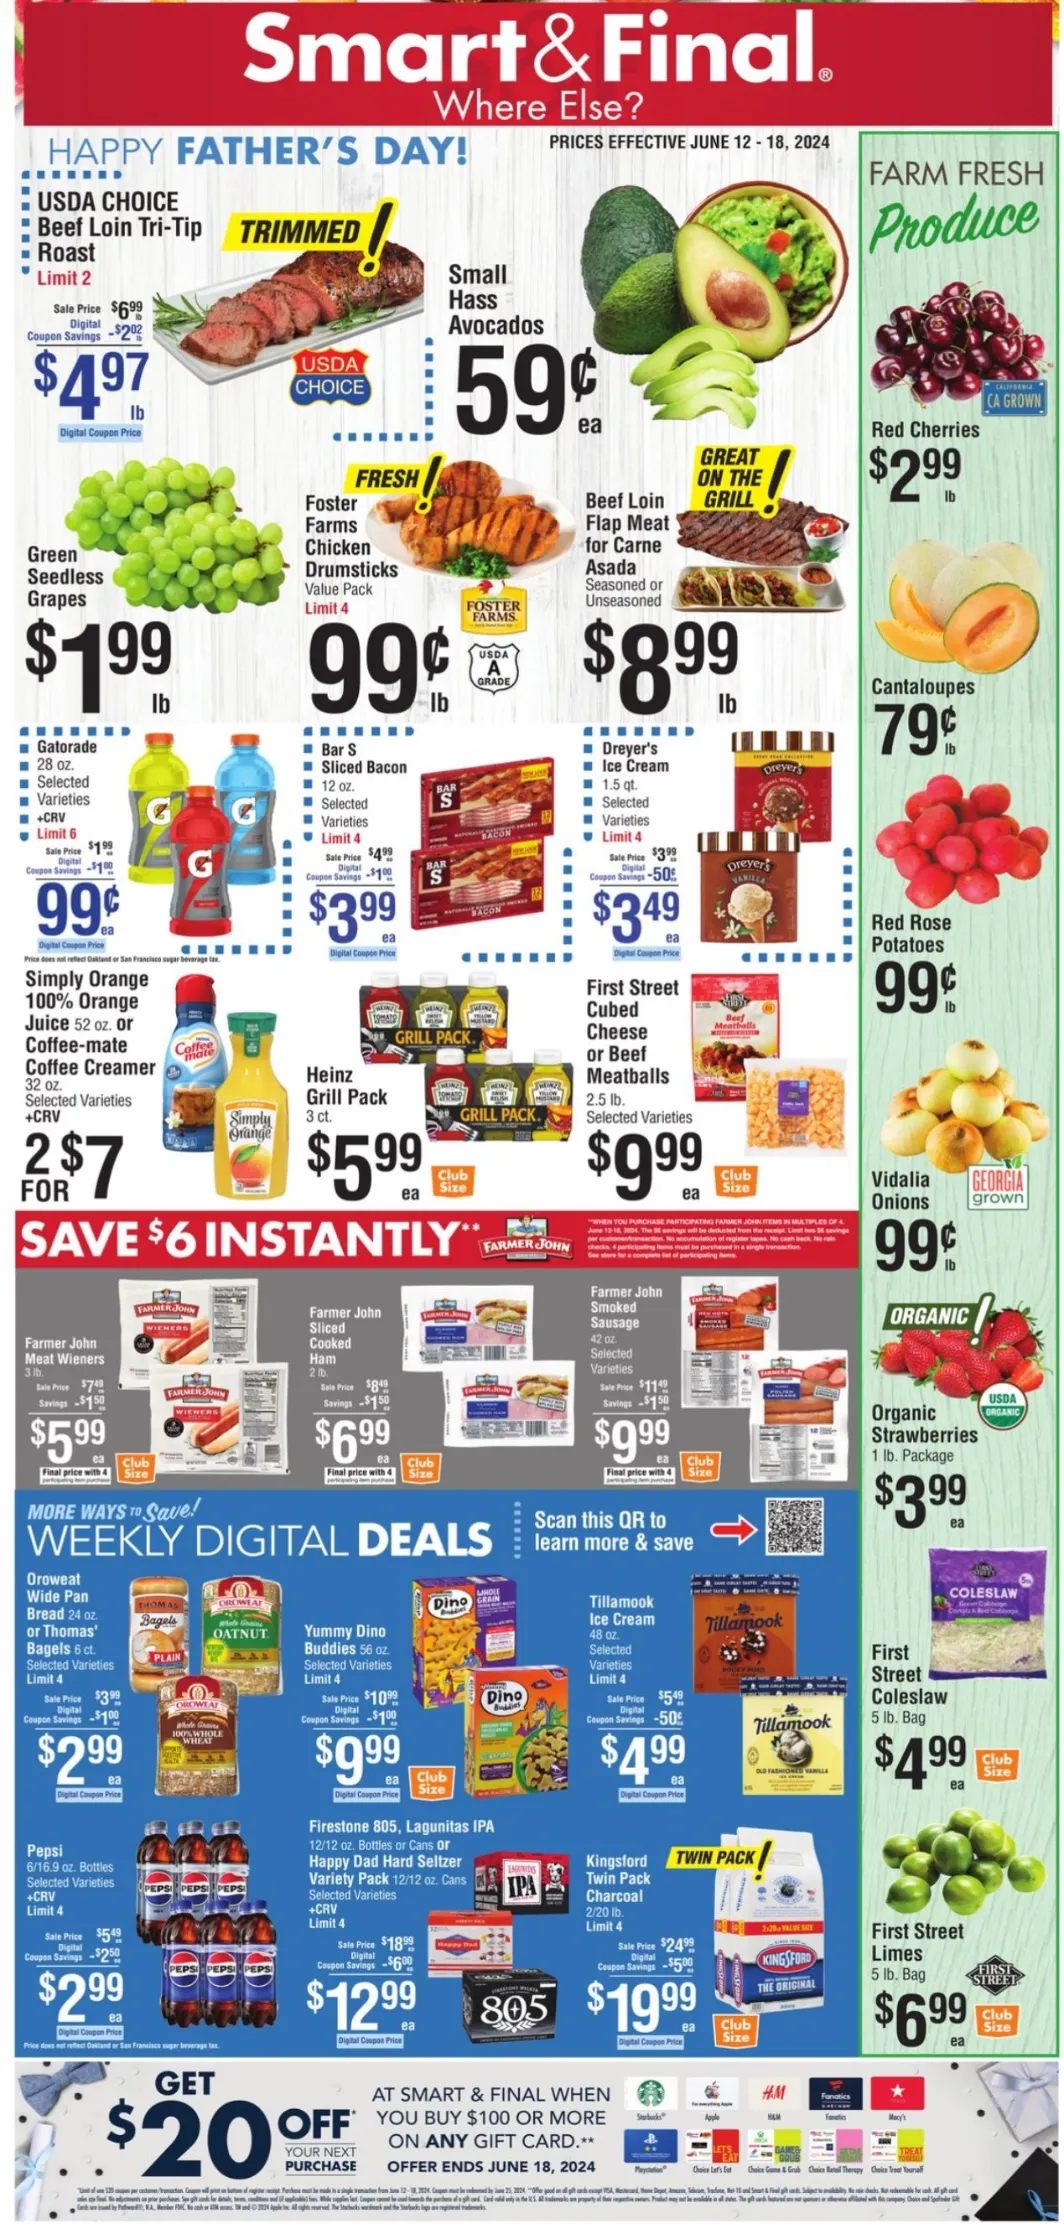 Smart and Final Weekly Ad July 2024 Weekly Sales, Deals, Discounts and Digital Coupons.